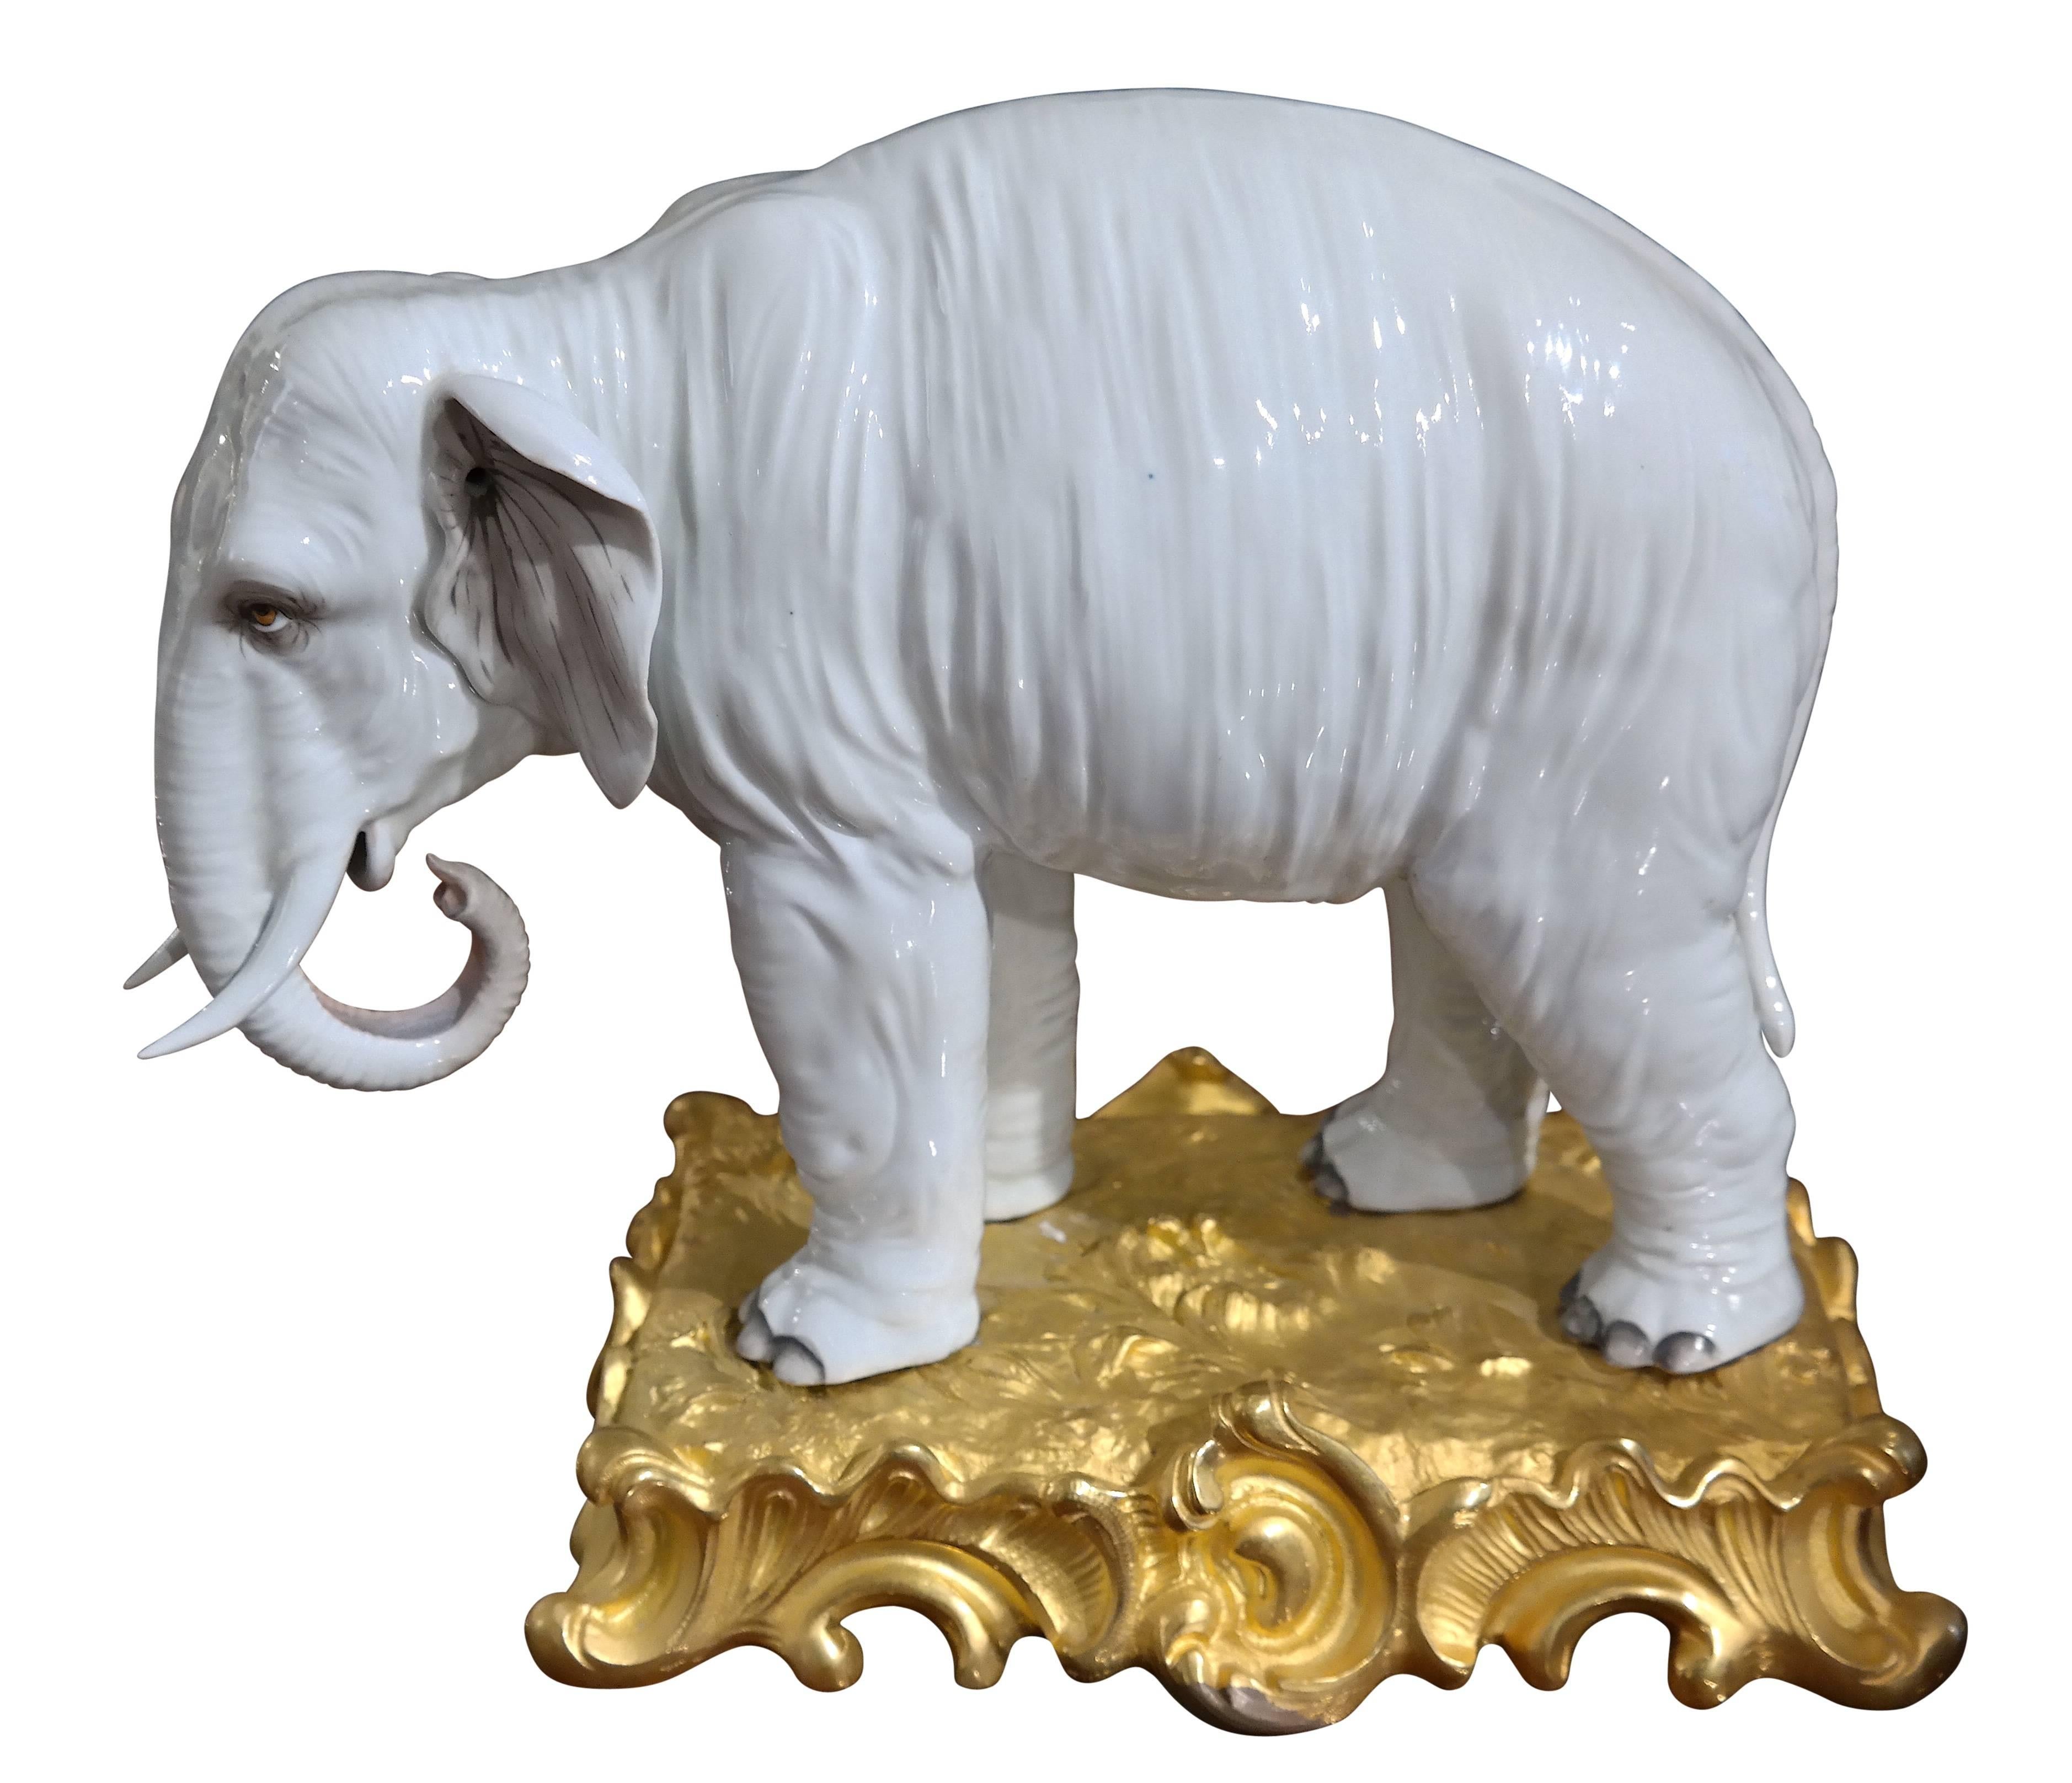 Porcelain elephant, probably SAMSON with French shear fire-gilded Bronze montage, 19th century.
One tusk is professionally restored.